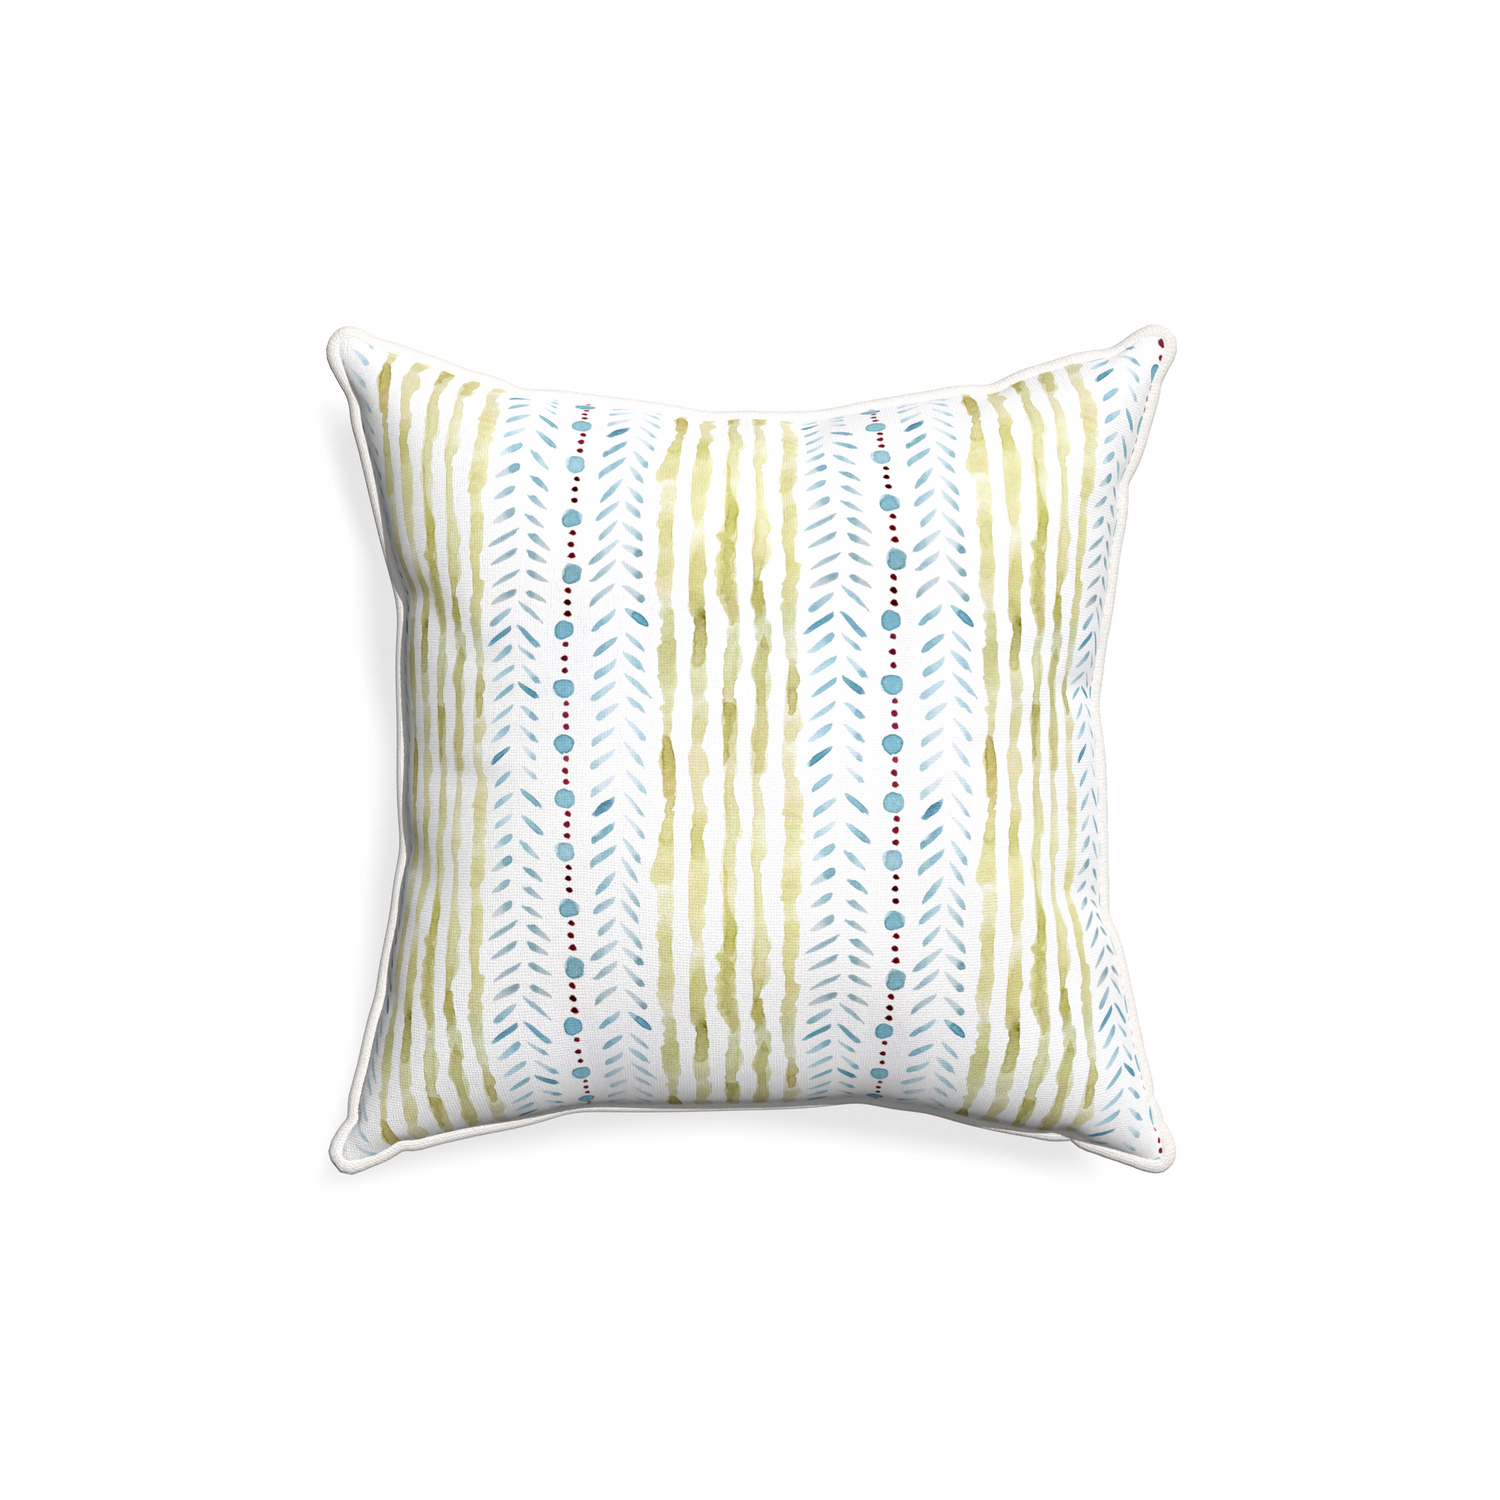 18-square julia custom pillow with snow piping on white background